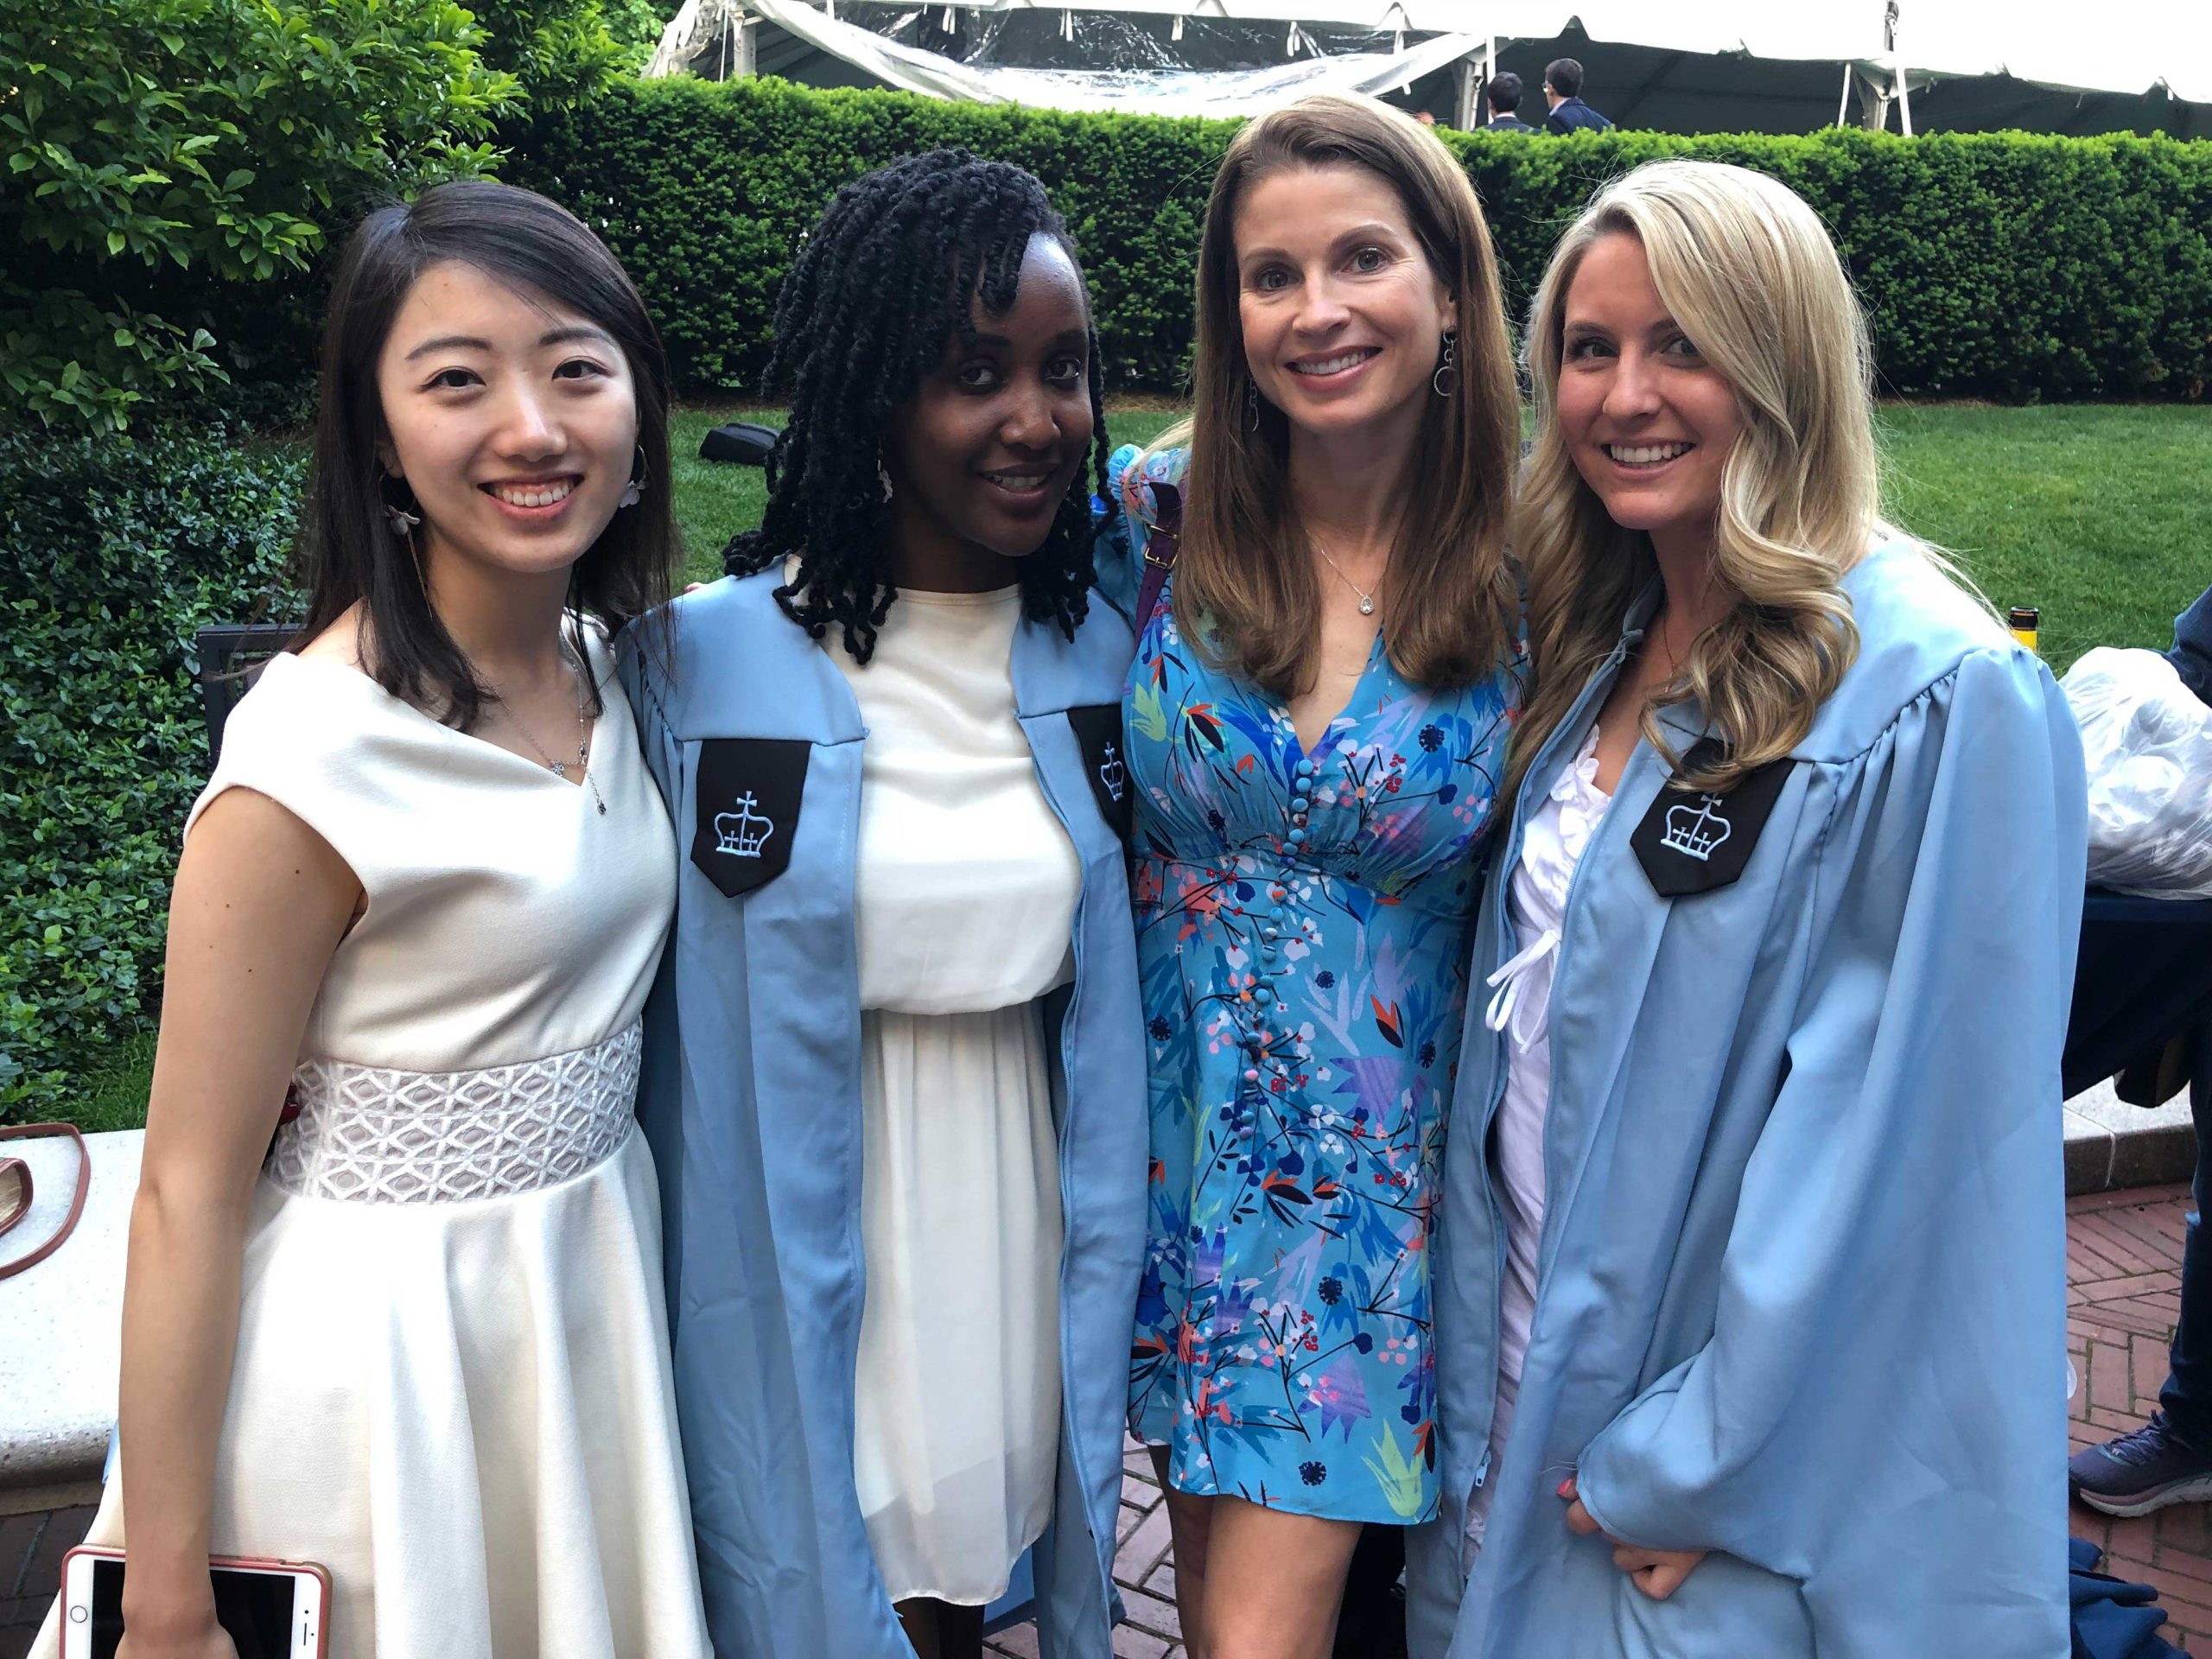 With Class of ‘19 Columbia Journalism School grads Melody Jiang, Caroline Kimeu, and Emily Tyree